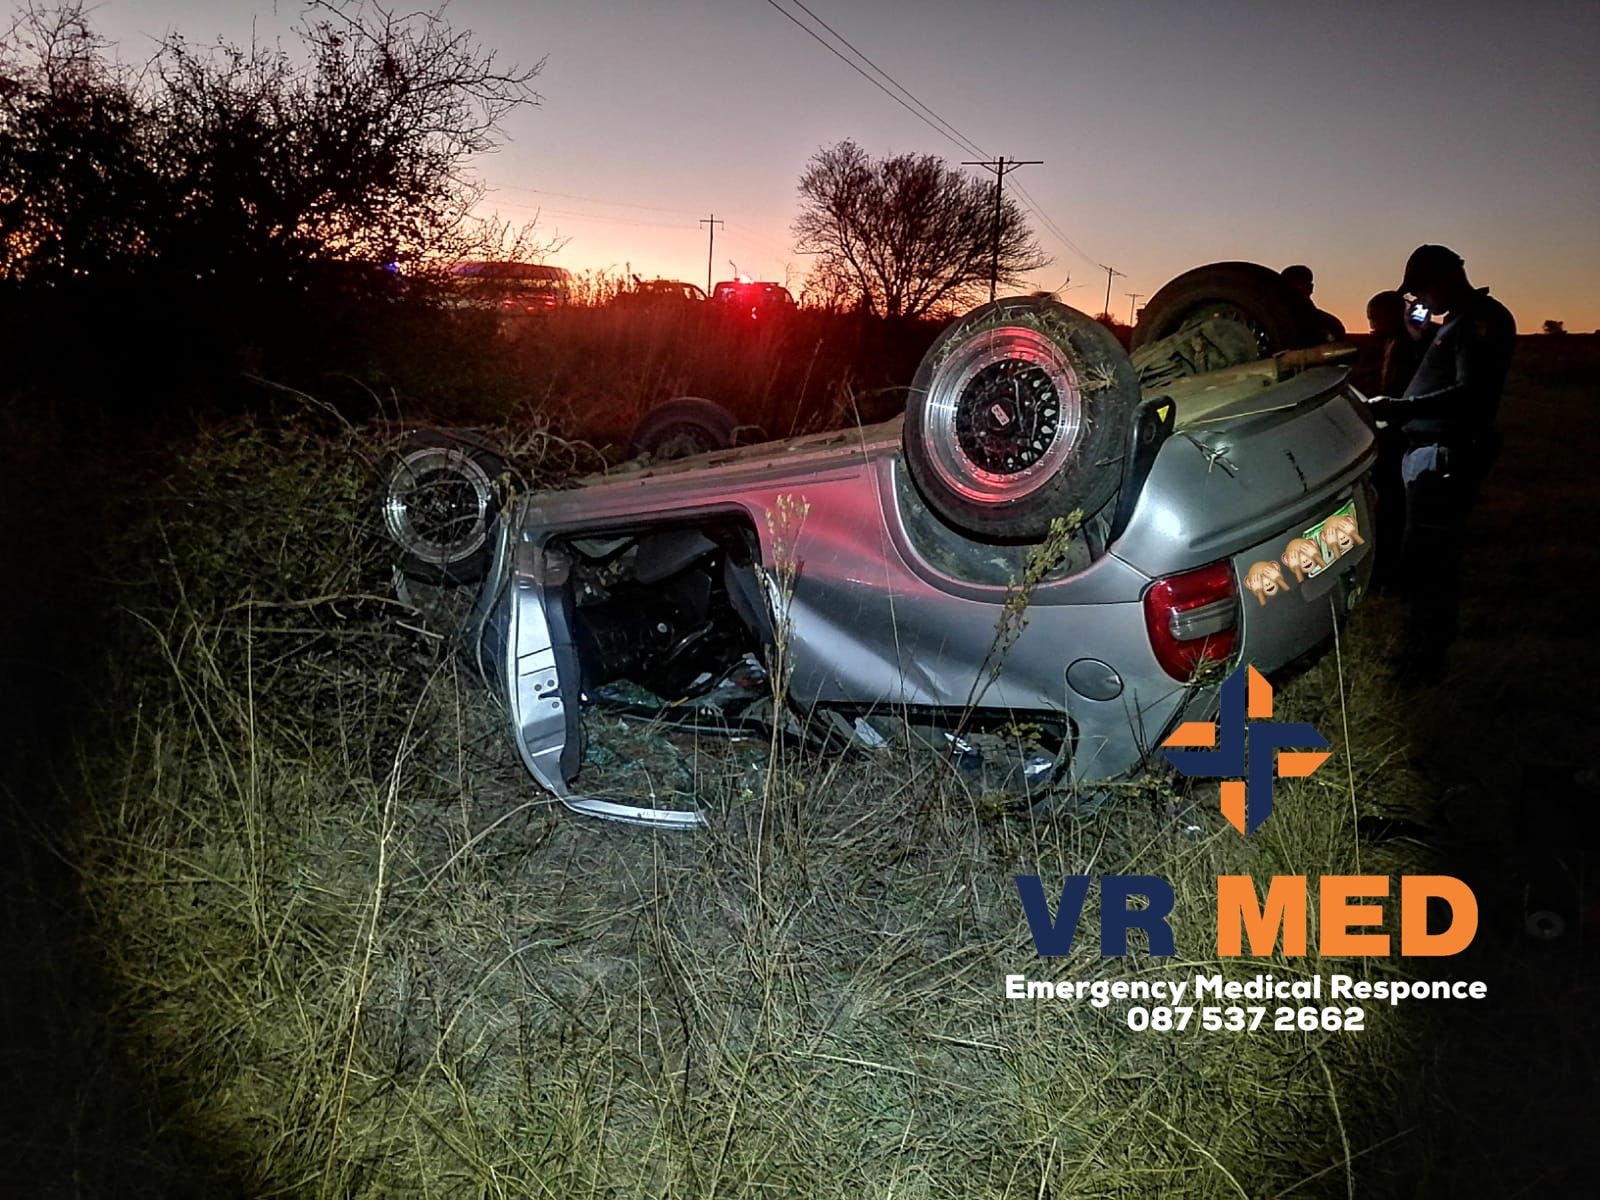 Vehicle rollover on the R700 approximately 15km out of Bloemfontein